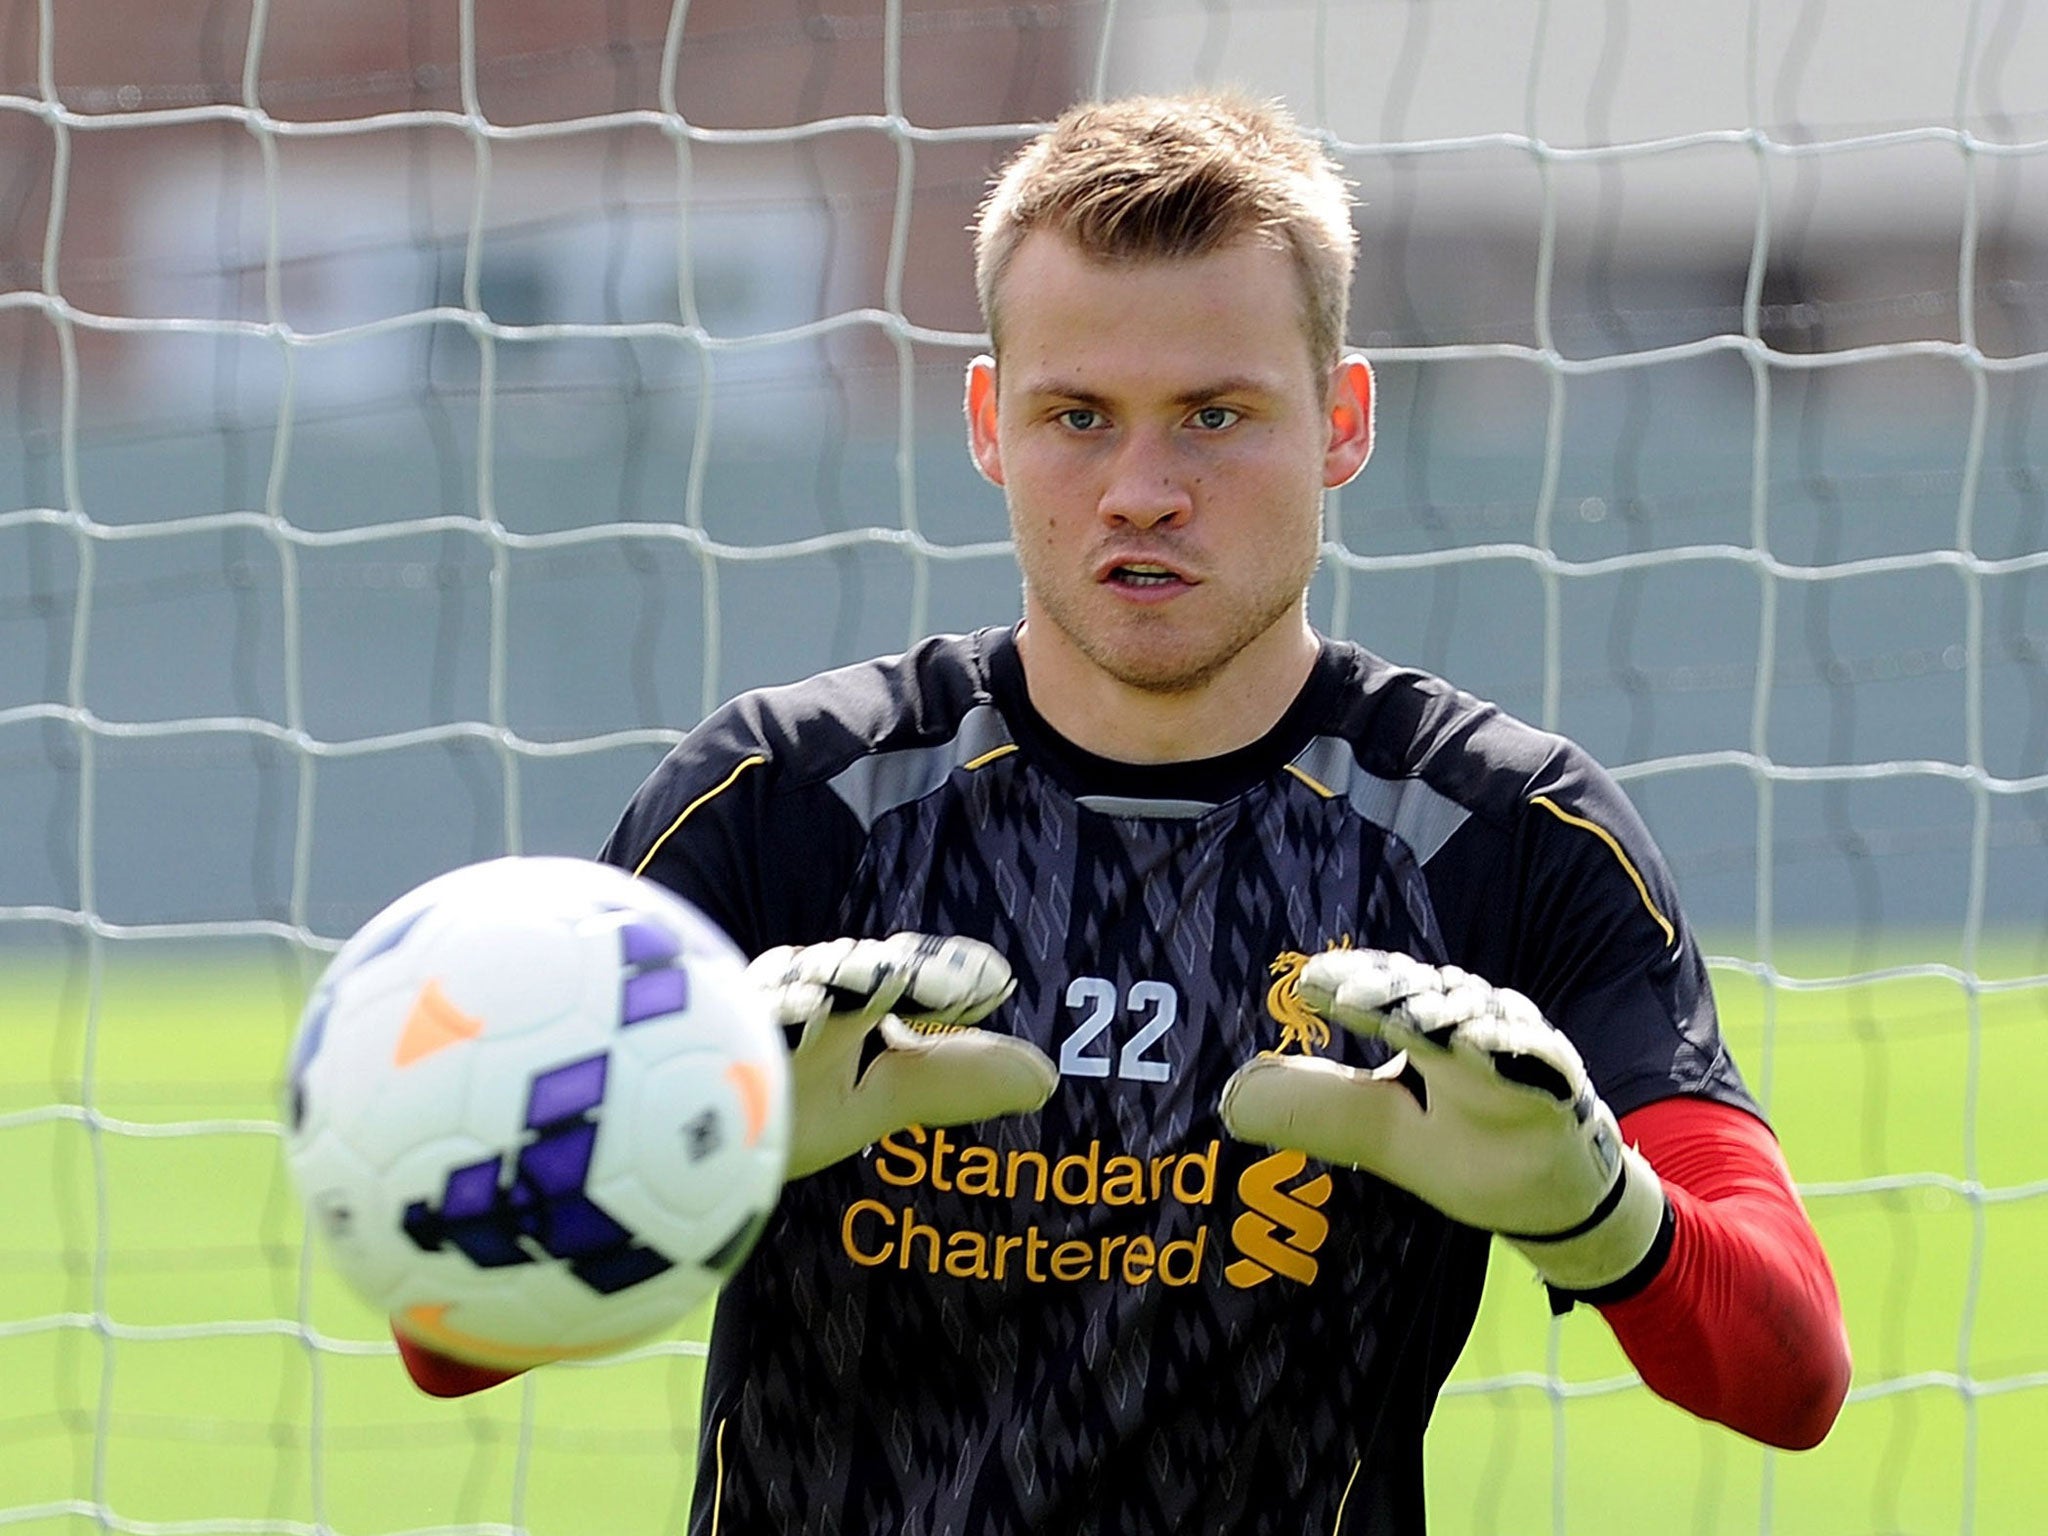 Simon Mignolet joined Liverpool in the summer